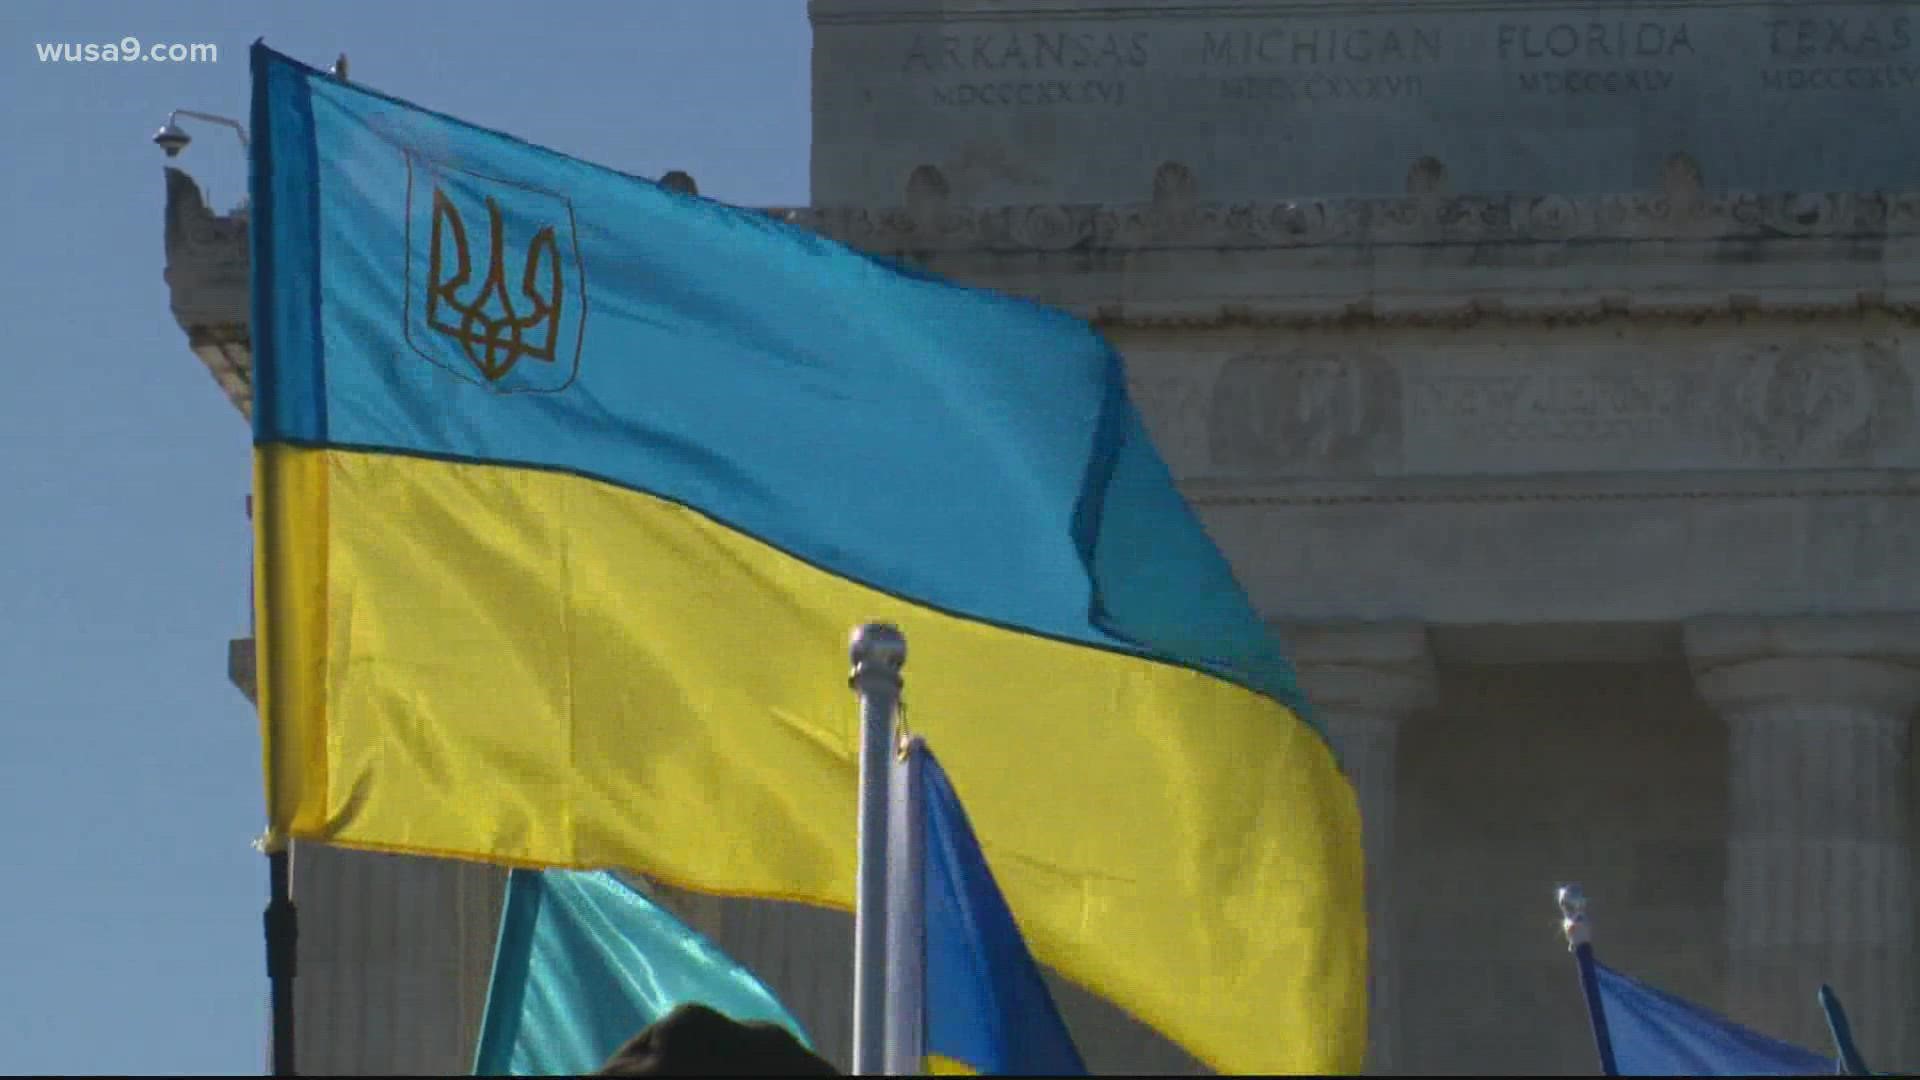 A rally in support of Ukraine began at the Lincoln Memorial on Sunday before heading to the White House.